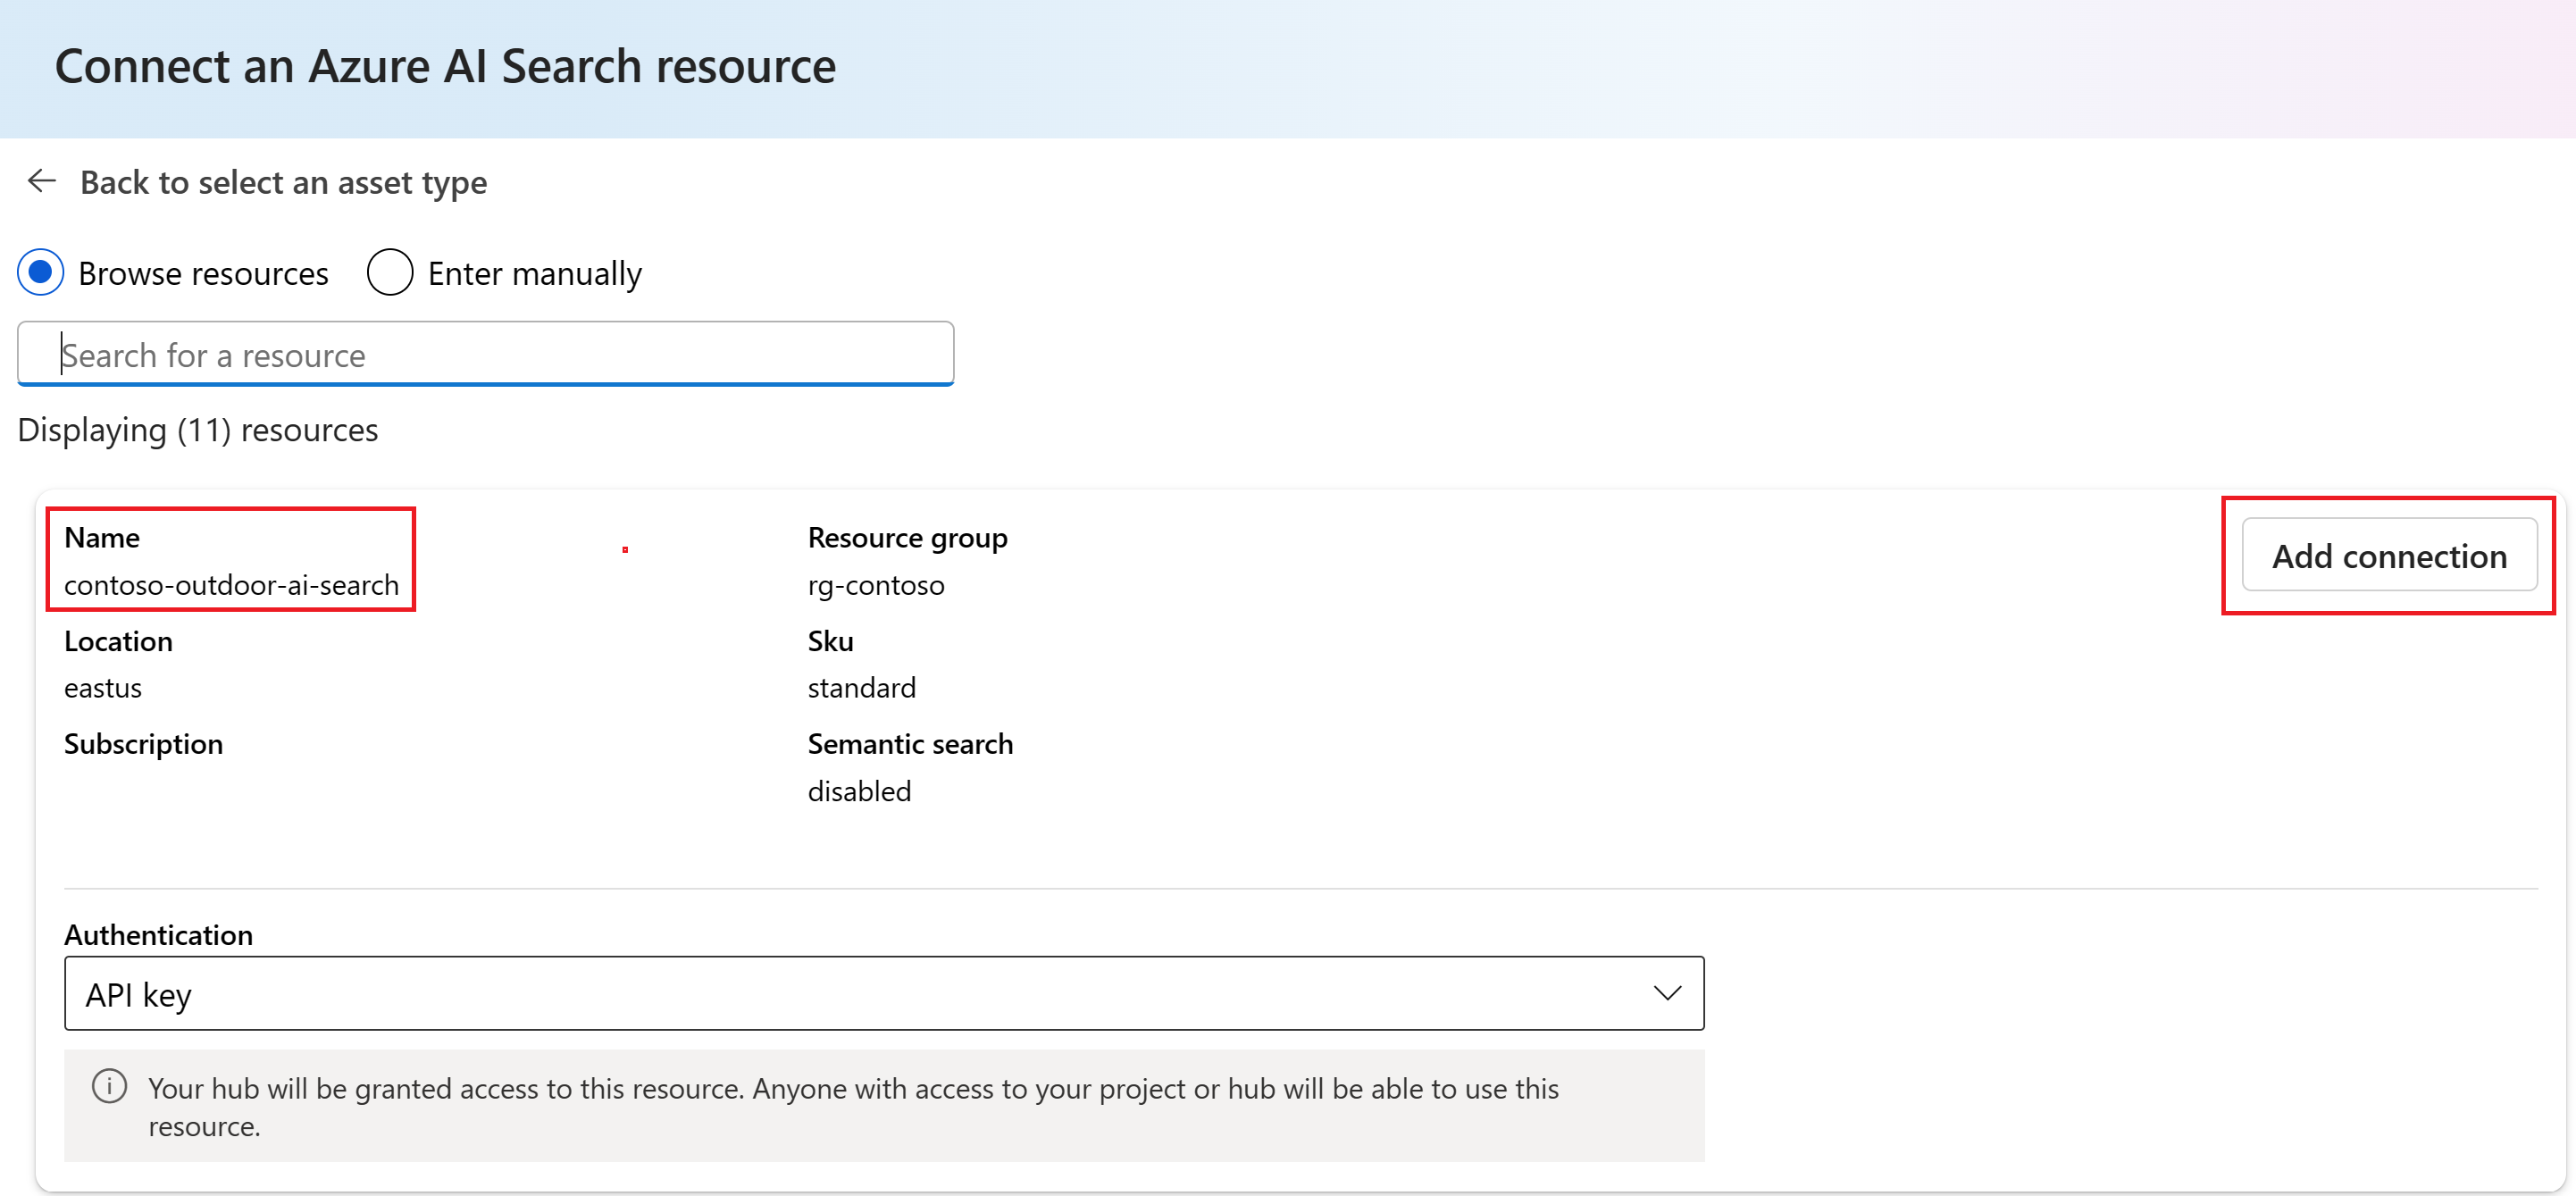 Screenshot of the page to select the Azure AI Search service that you want to connect to.